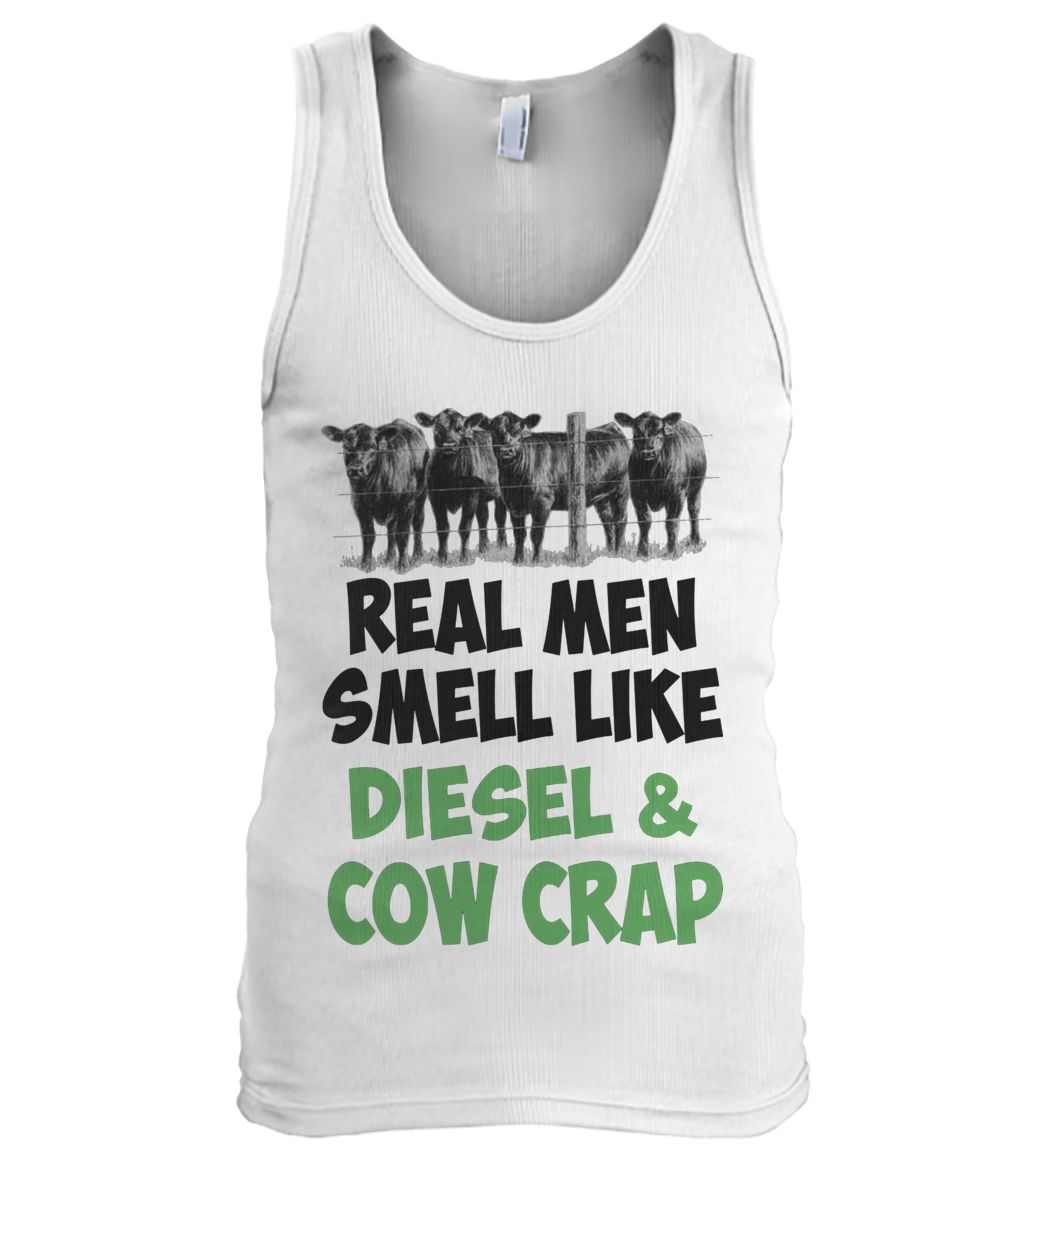 Famer real men smell like diesel and cow crap men's tank top